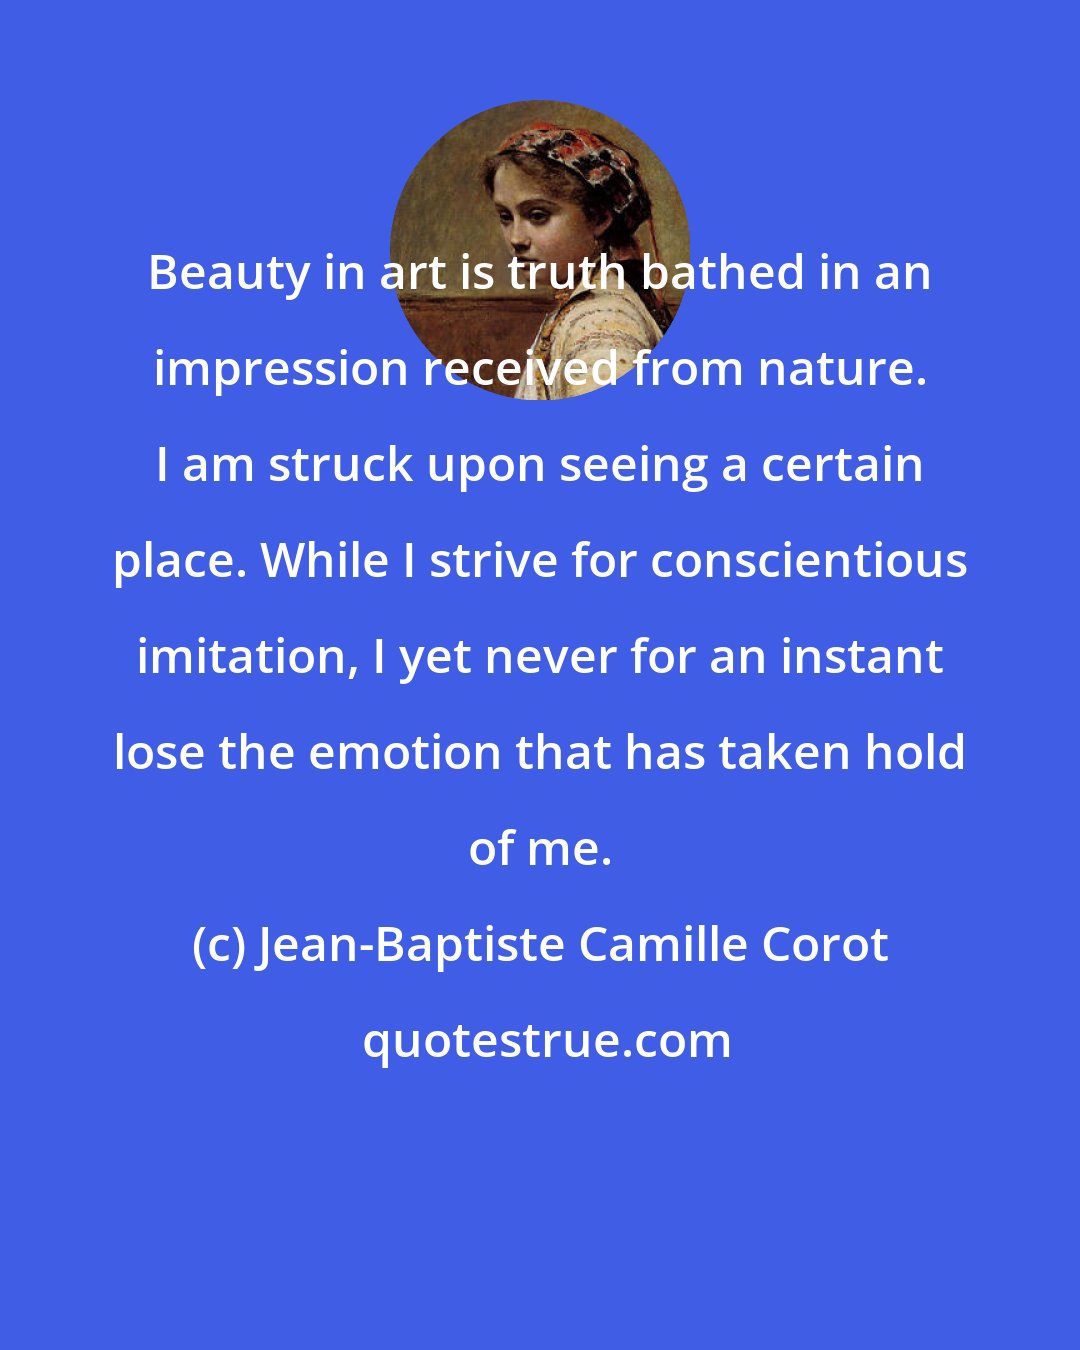 Jean-Baptiste Camille Corot: Beauty in art is truth bathed in an impression received from nature. I am struck upon seeing a certain place. While I strive for conscientious imitation, I yet never for an instant lose the emotion that has taken hold of me.